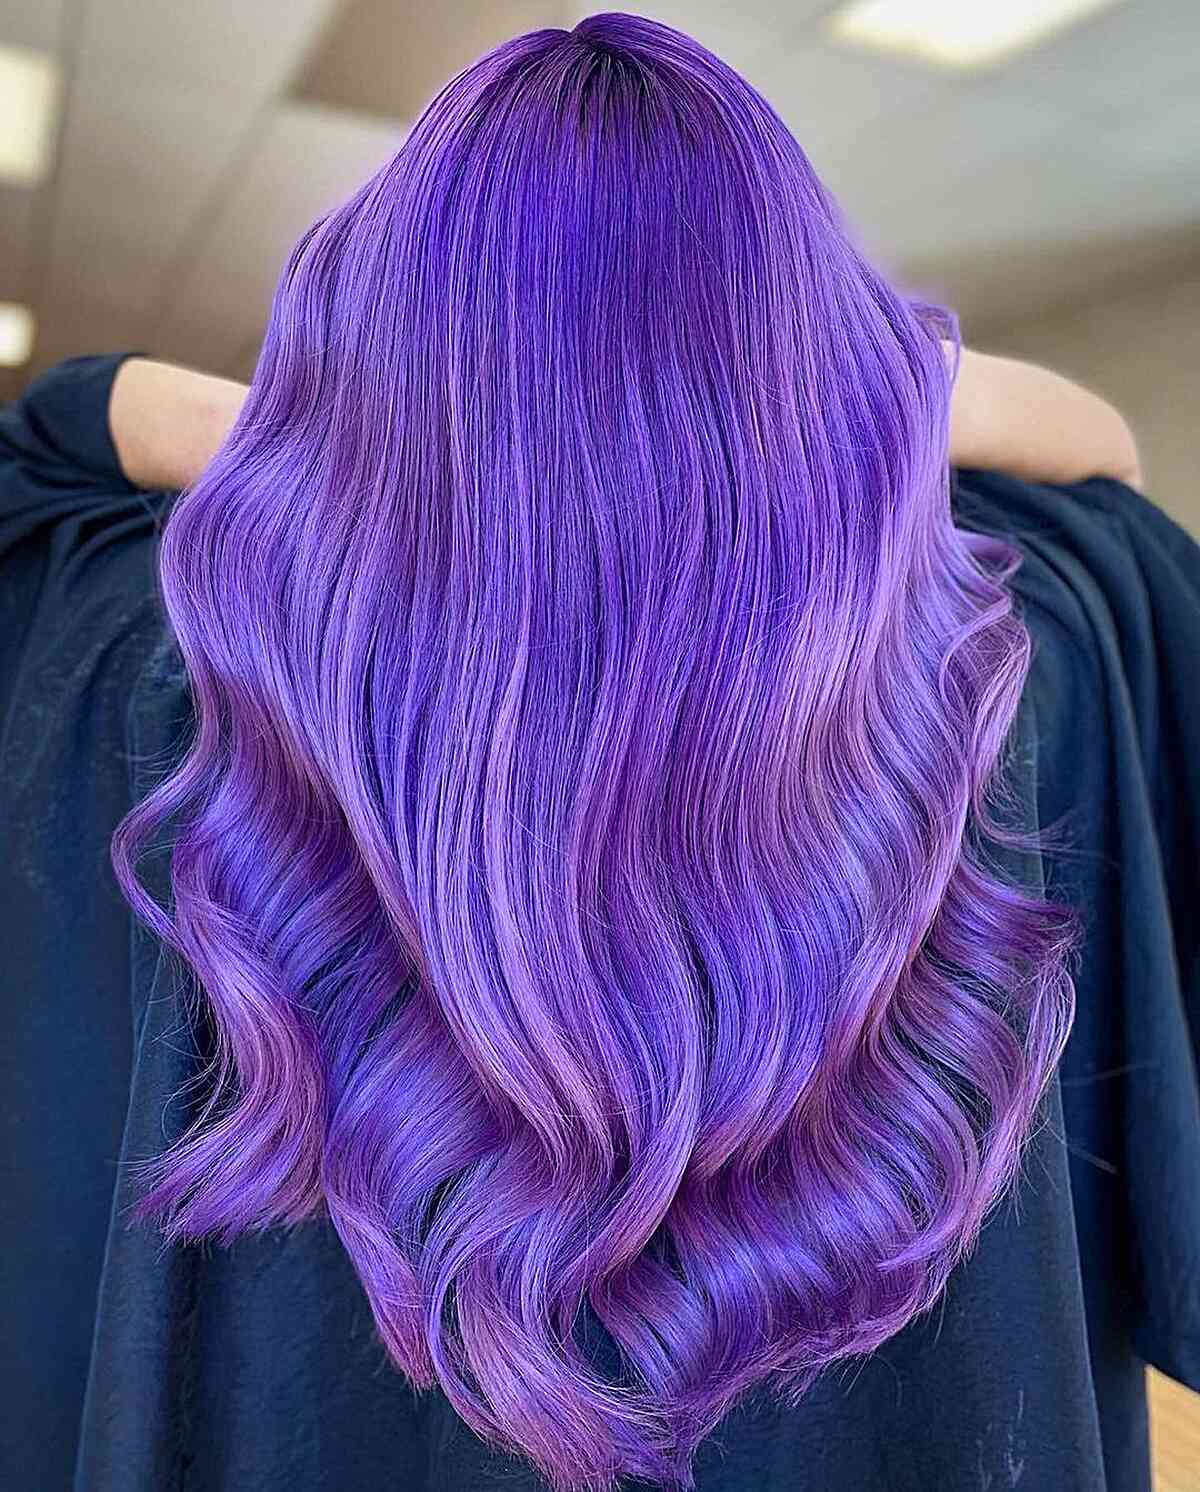 Amazing Amethyst Purple Hair Color for women with an edgy style